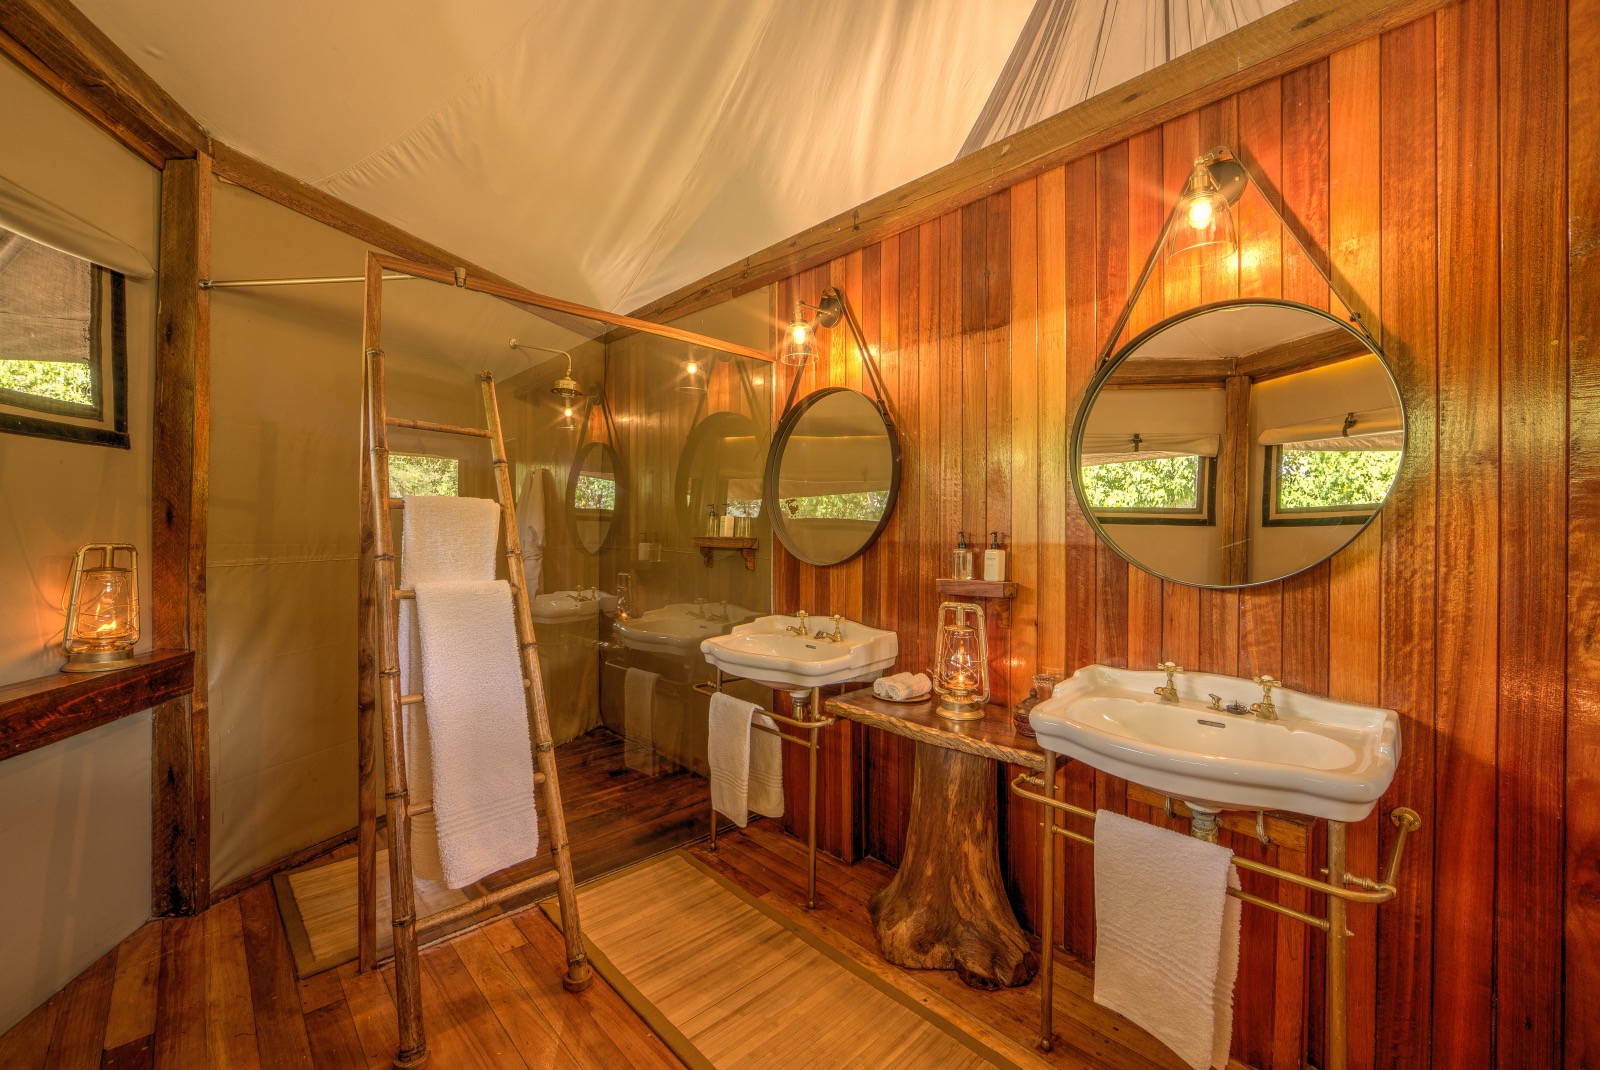 En suite bathrooms with wooden panelling and canvas ceiling and twin sinks and mirrors